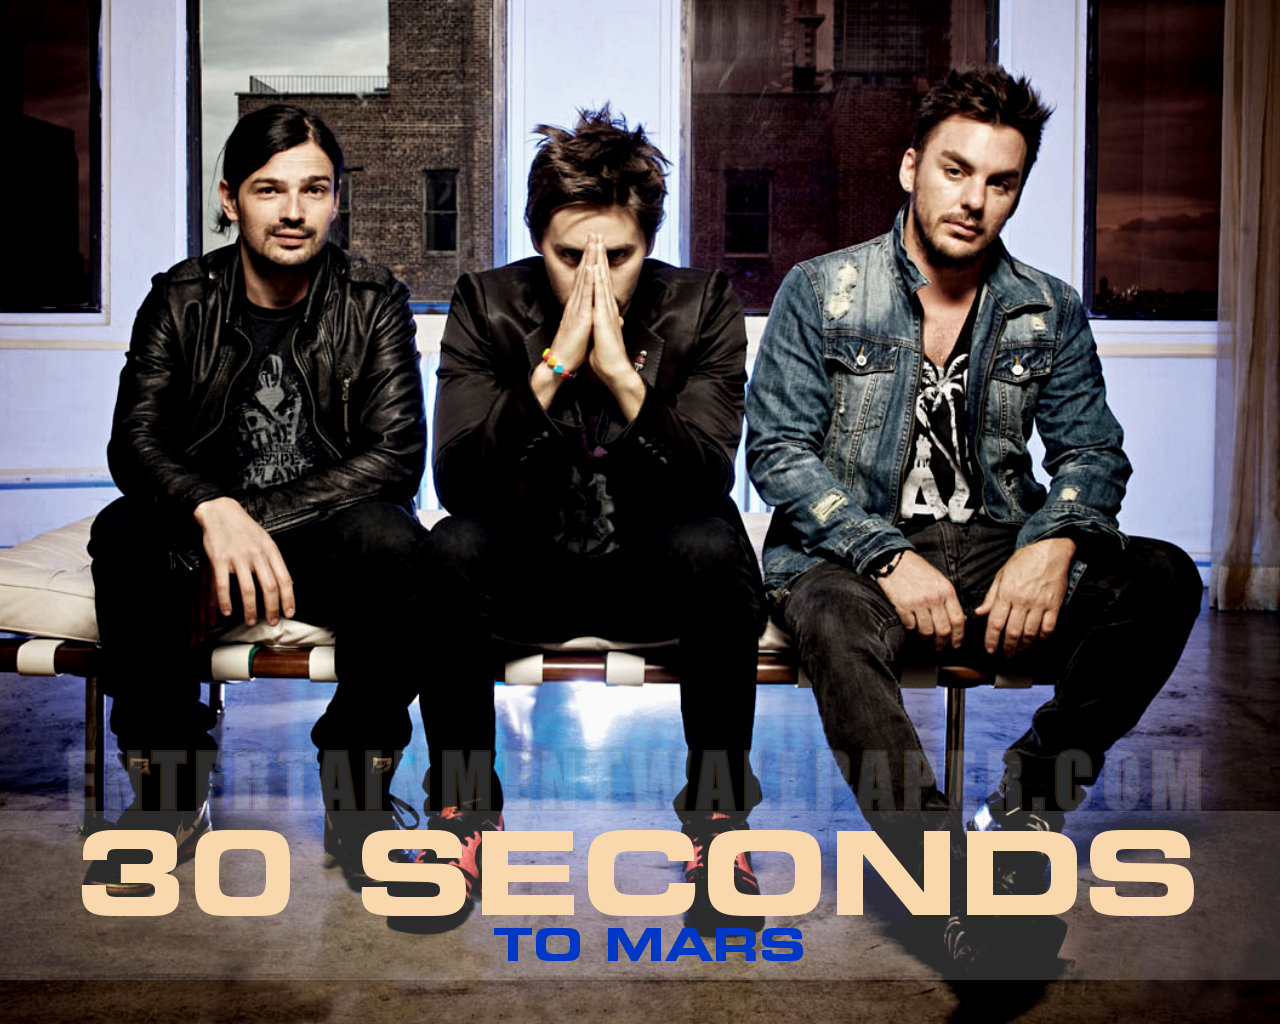 30 seconds to mars wallpaper,movie,photography,album cover